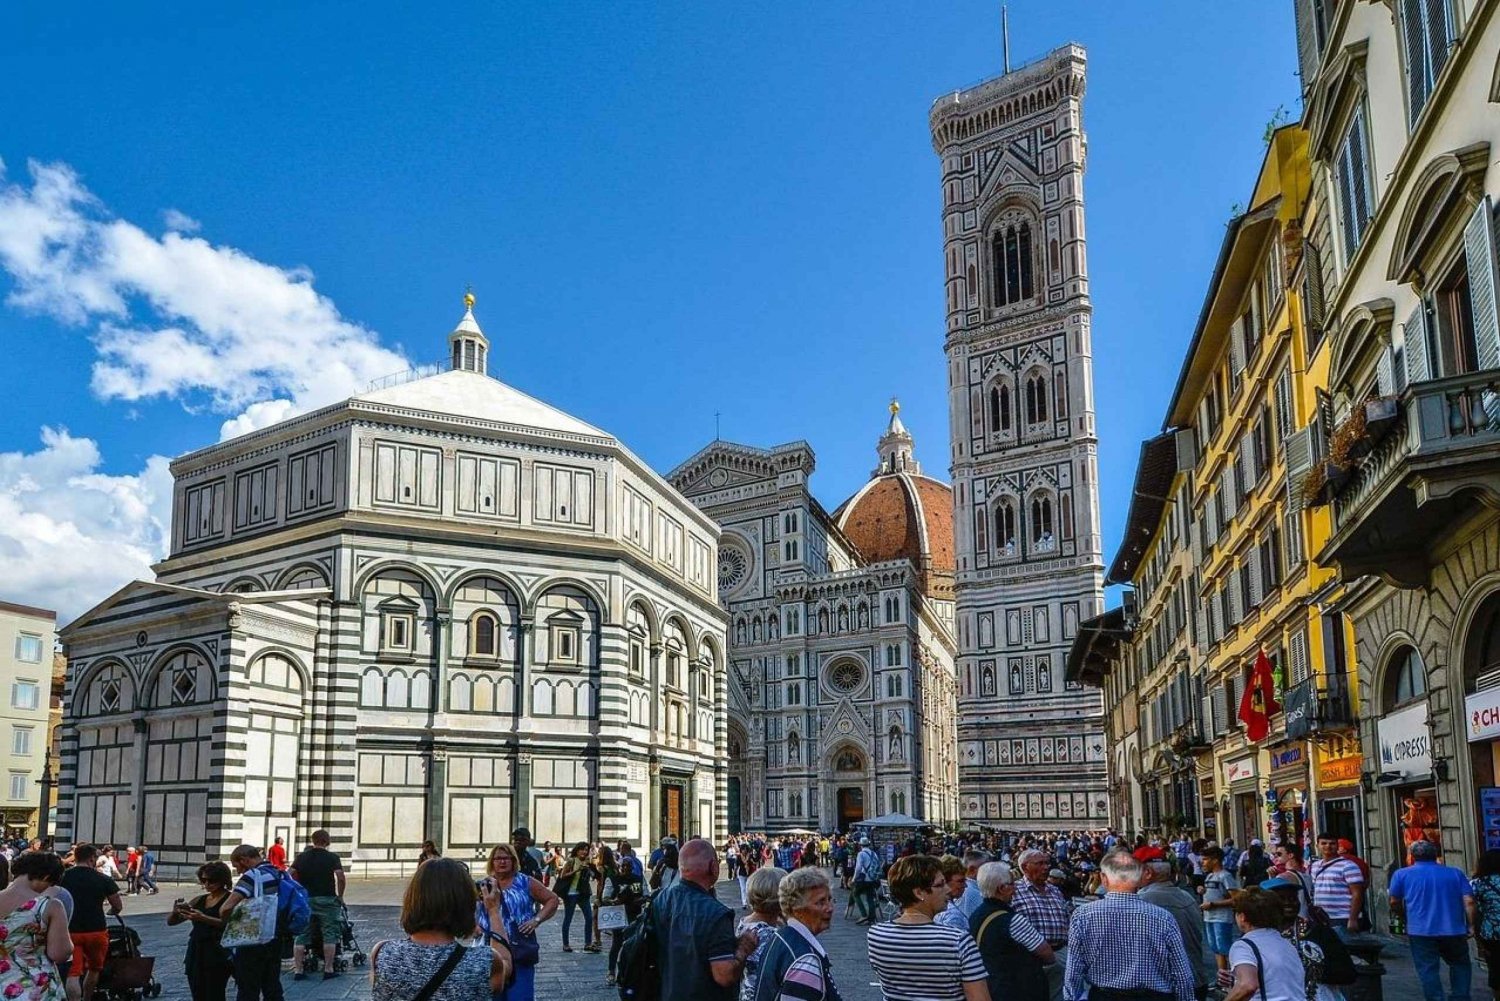 Firenze: Audio Guide Tour with 21 Attraction Visits: Audio Guide Tour with 21 Attraction Visits